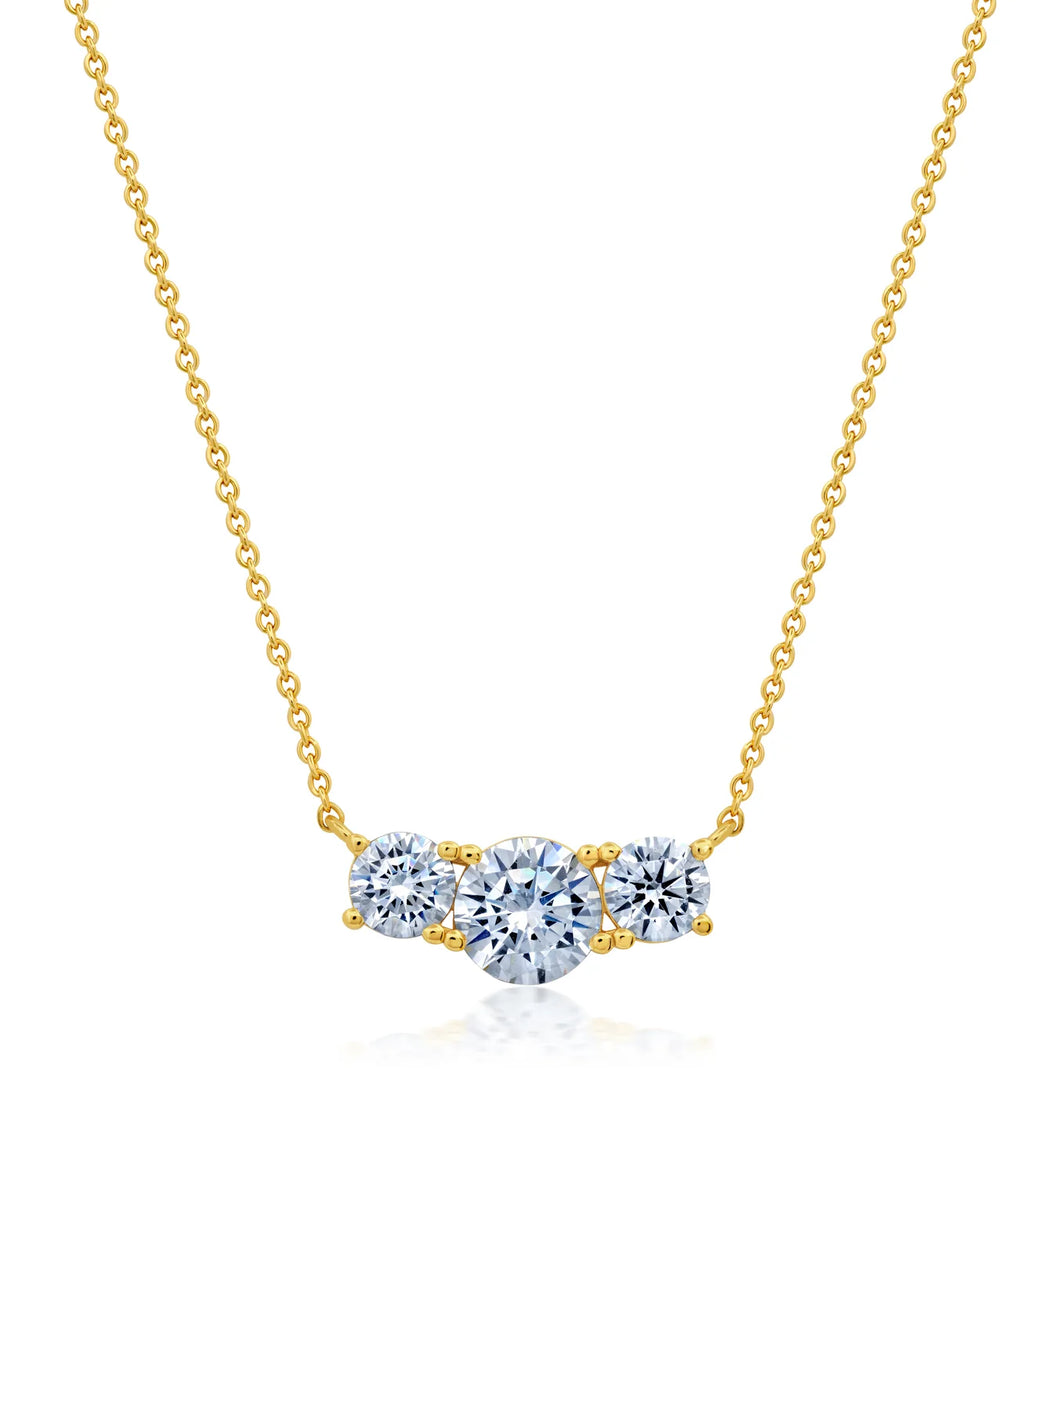 Crislu Brilliant Round 3 Stone Prong Set 16'' Extending Necklace Finished in 18Kt Yellow Gold